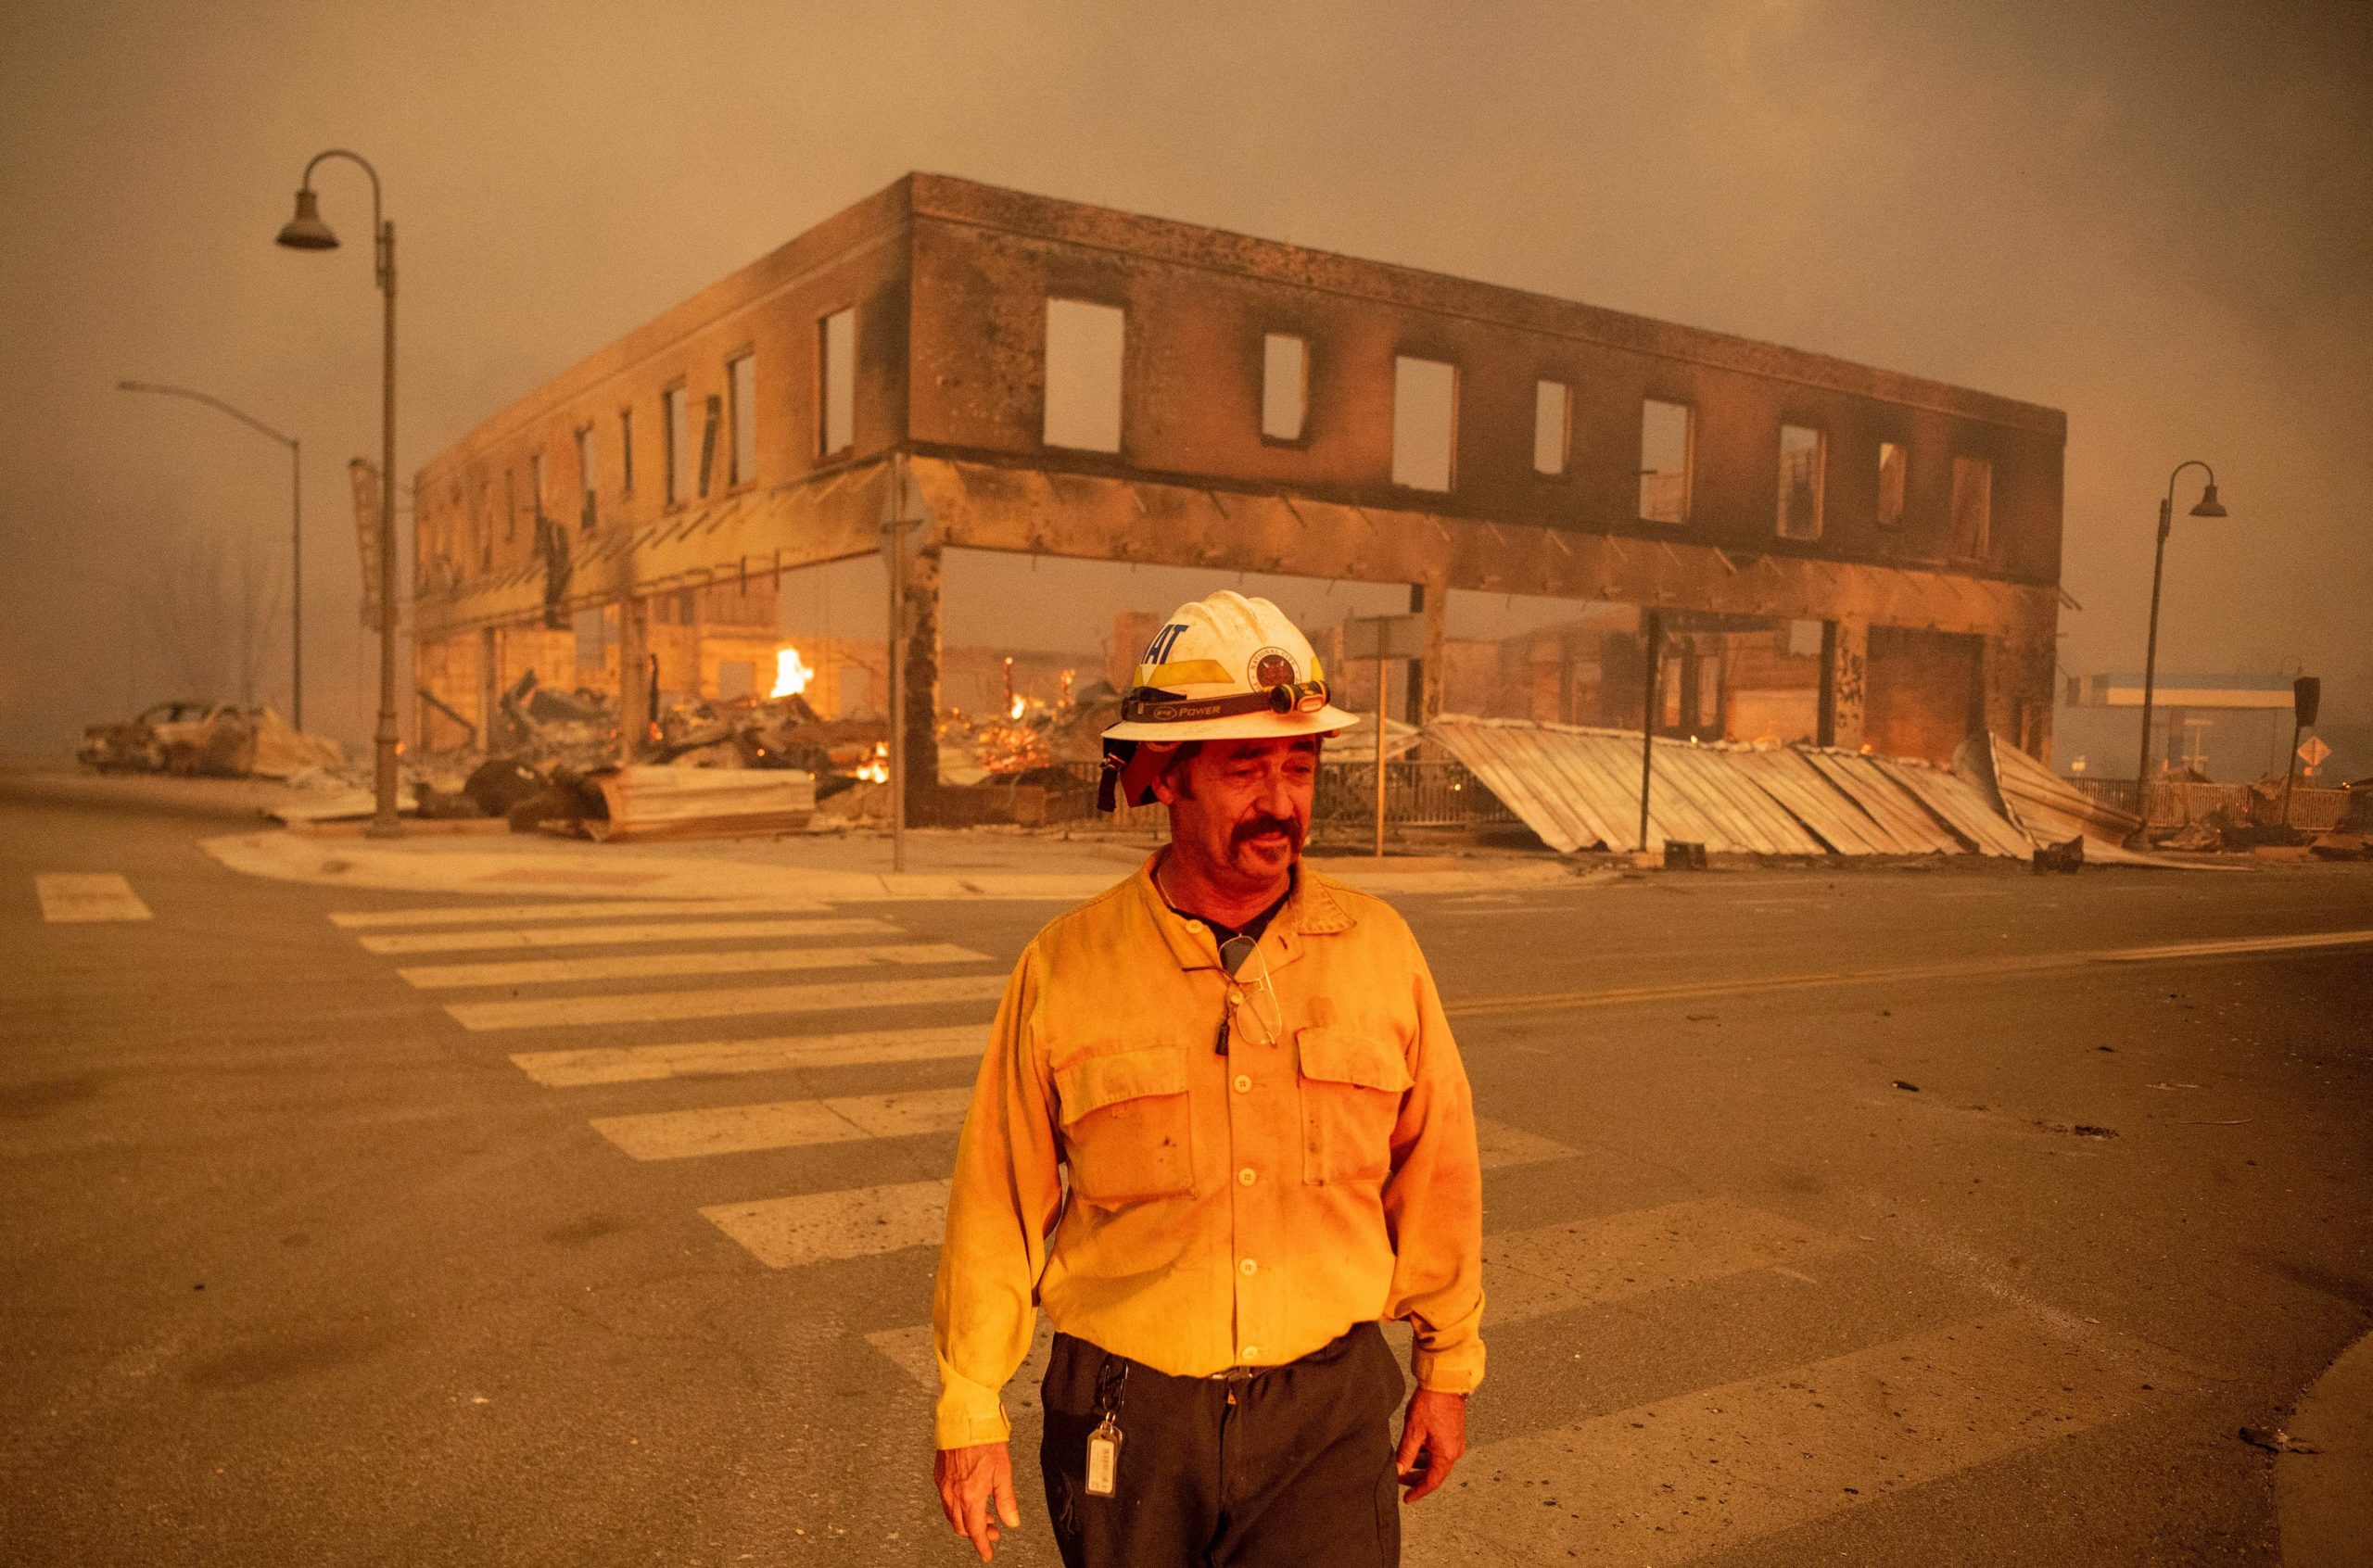 Battalion Chief Sergio Mora looks on as the Dixie fire burns through downtown Greenville, California, on Aug. 4, 2021. (Photo: Josh Edelson/AFP, Getty Images)